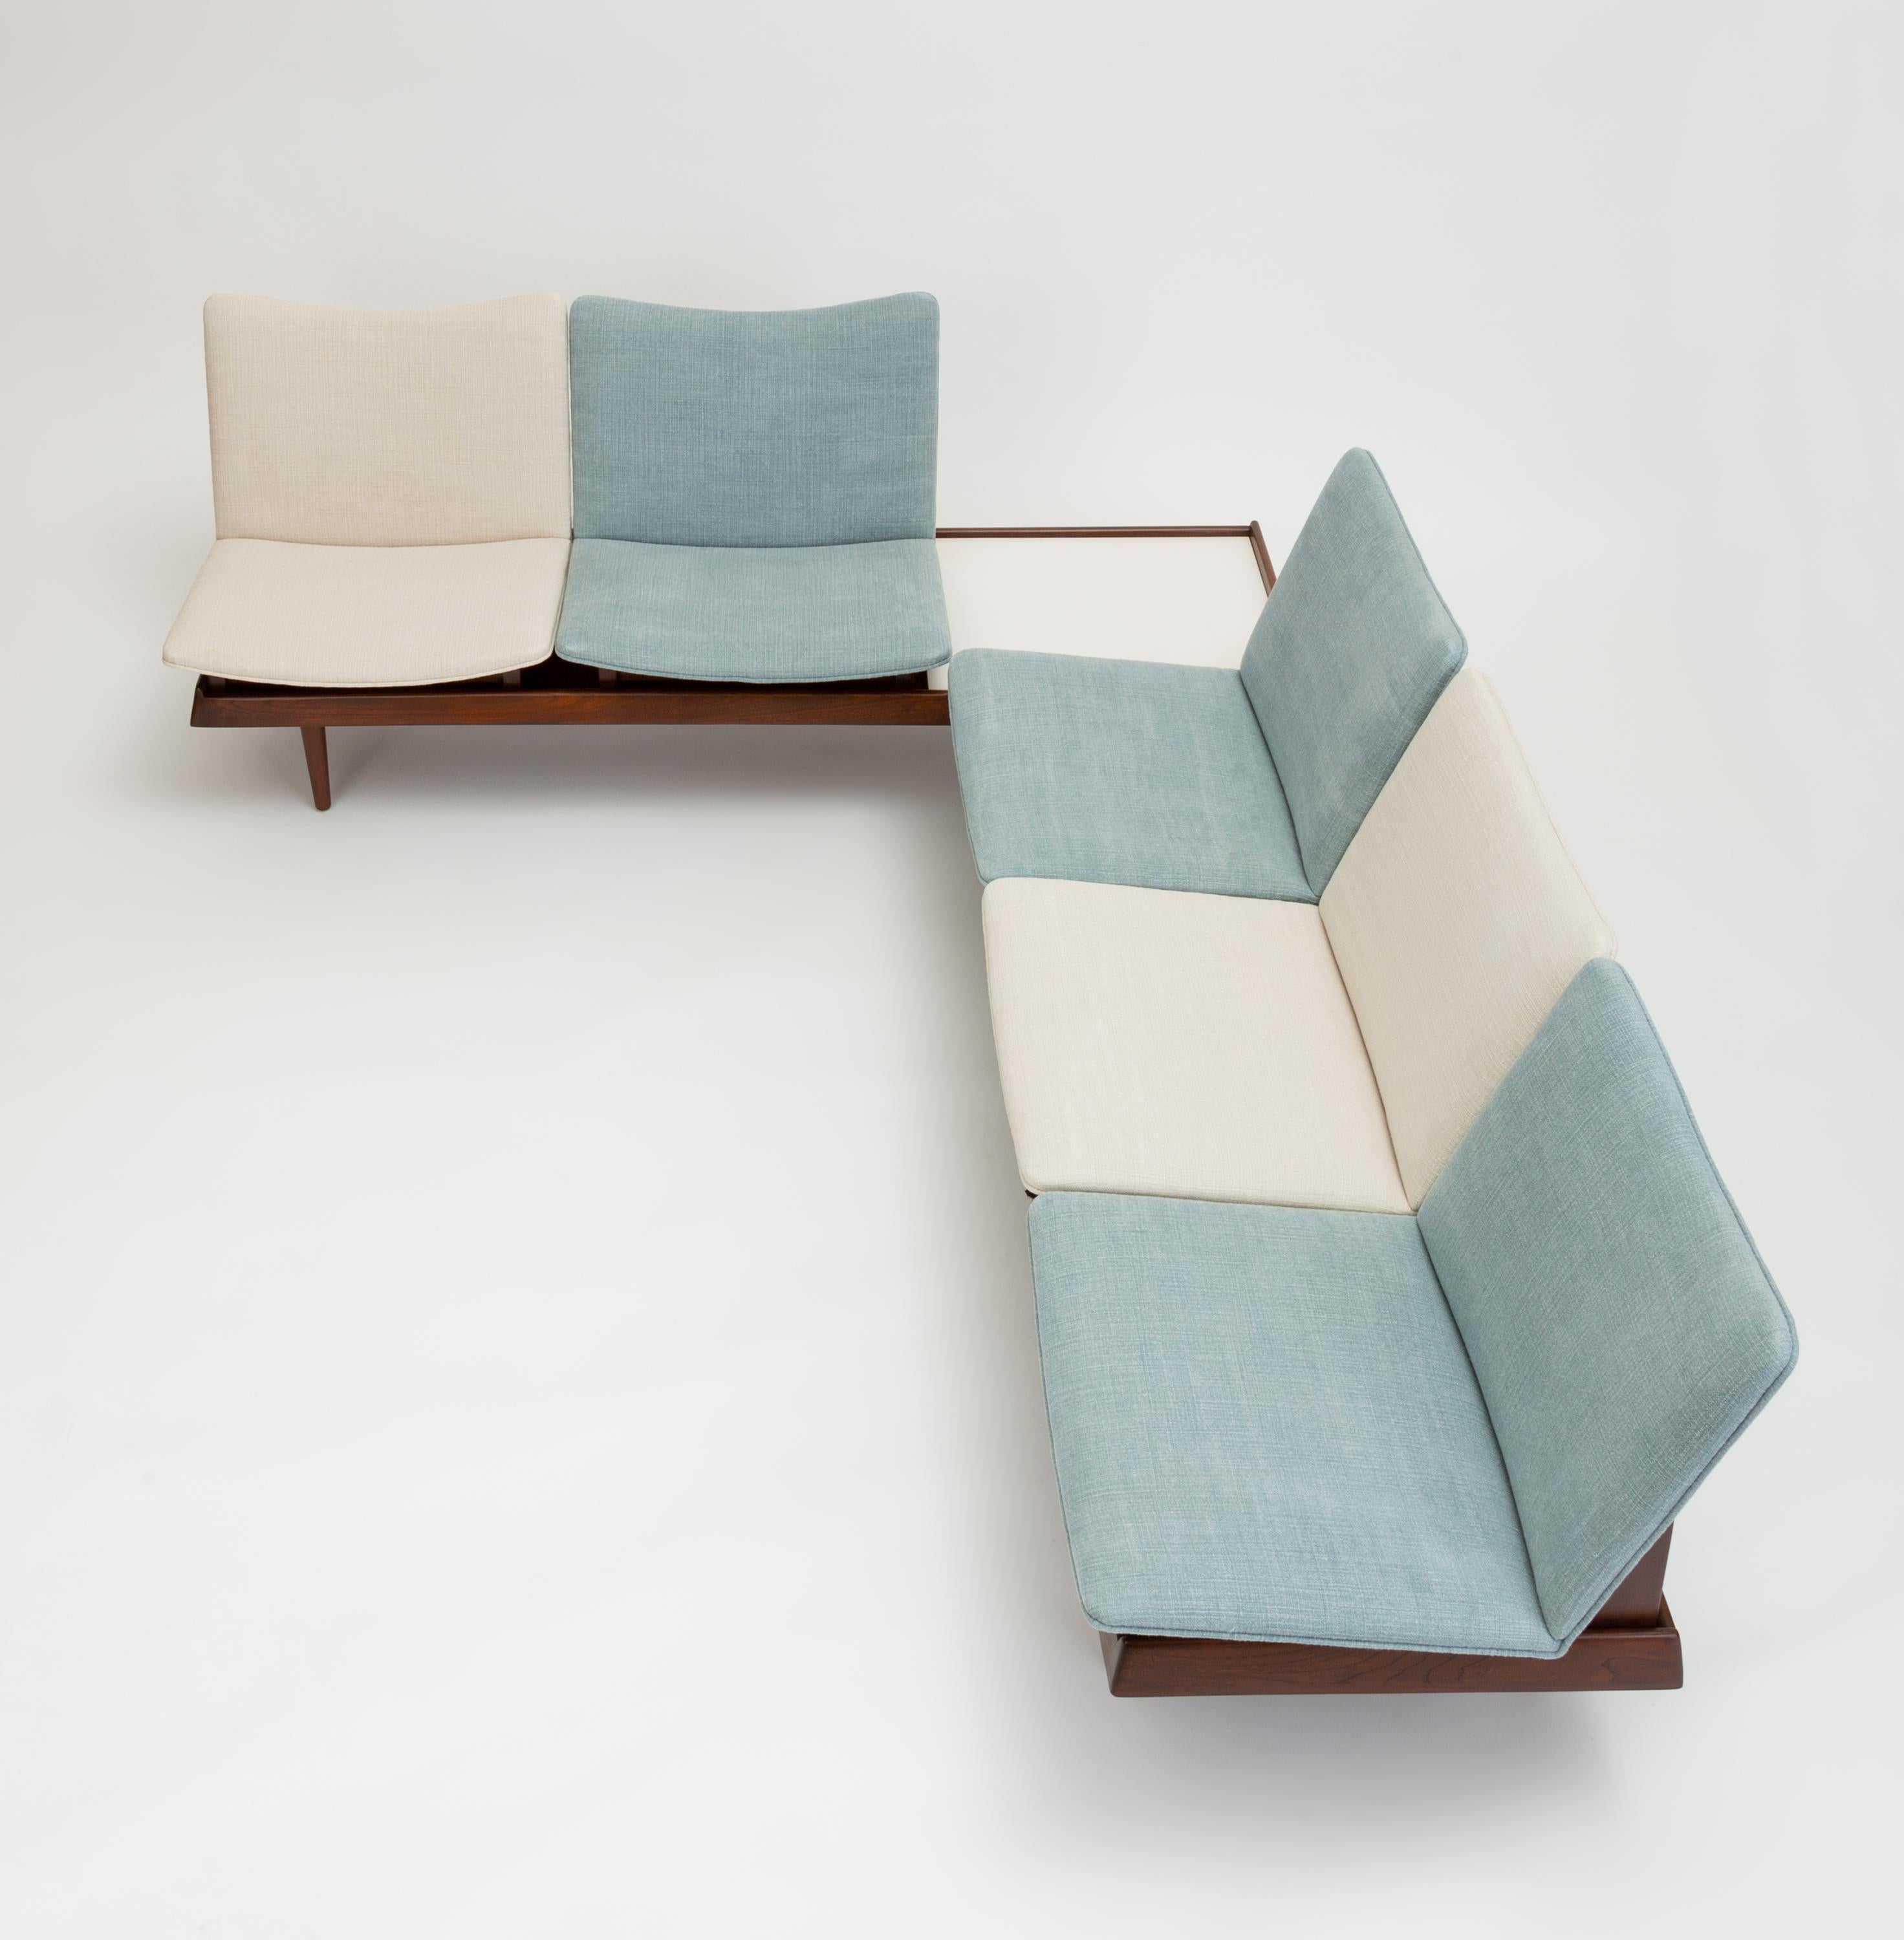 Two modular benches or small sofas with interchangeable seating modules and surfaces by California designer Gerald McCabe. Each piece has a low walnut base with raised edges and round, tapered legs. Each bench fits three modules. Included in the set